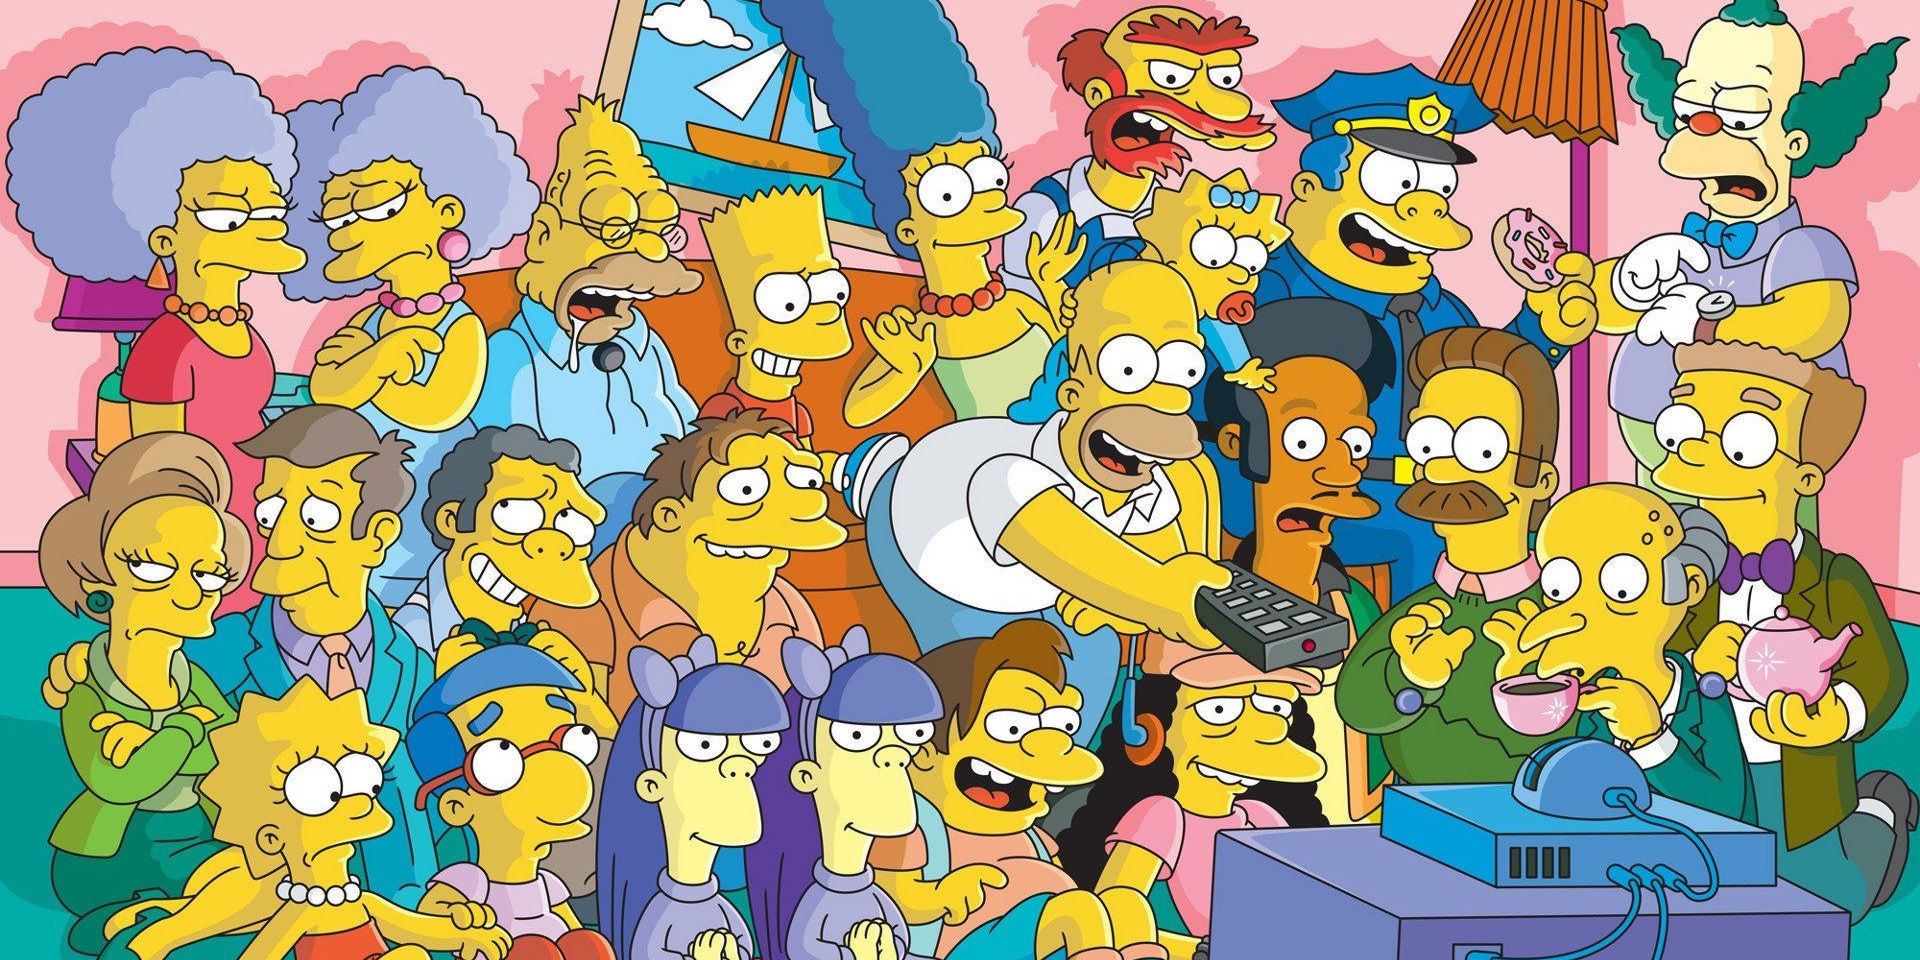 Every major Simpsons character crowded around a TV